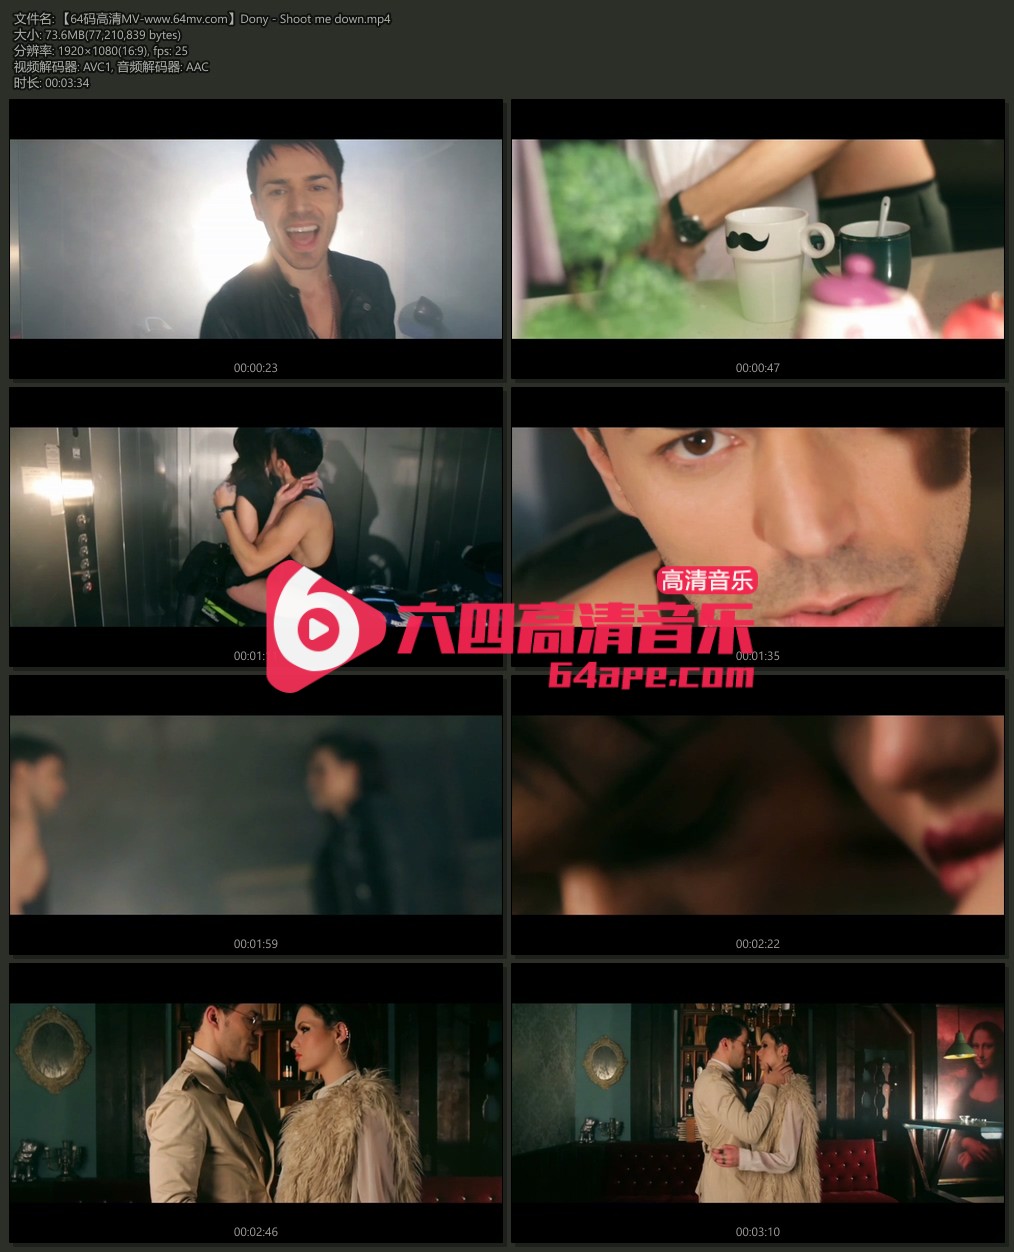 Dony 《Shoot me down》 1080P